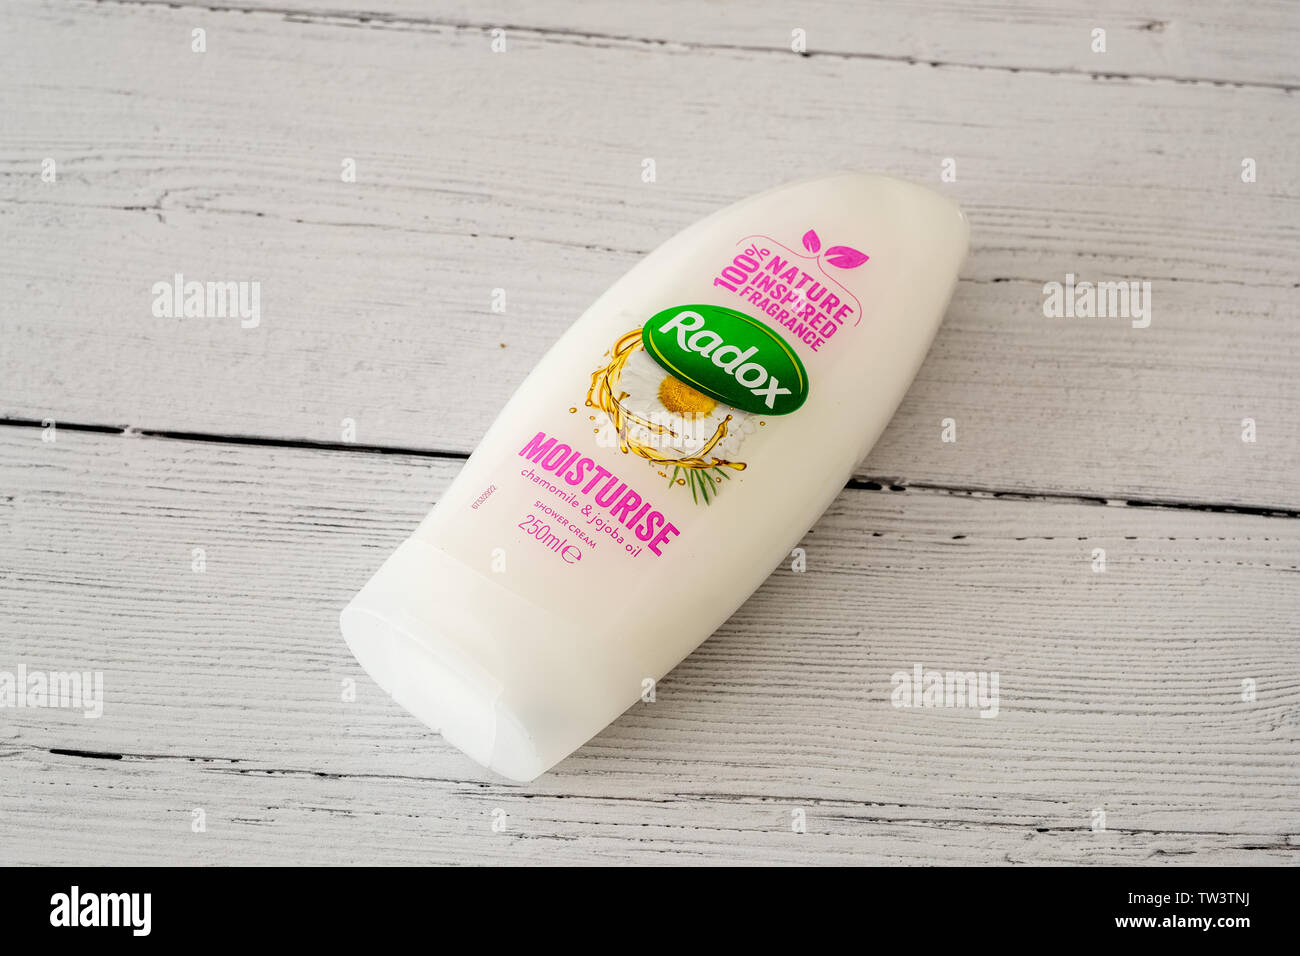 Largs, Scotland, UK - June 06, 2019: Radox branded moisturise cream in a plastic recyclable bottle and cap in line with UK recycling guidelines. Stock Photo